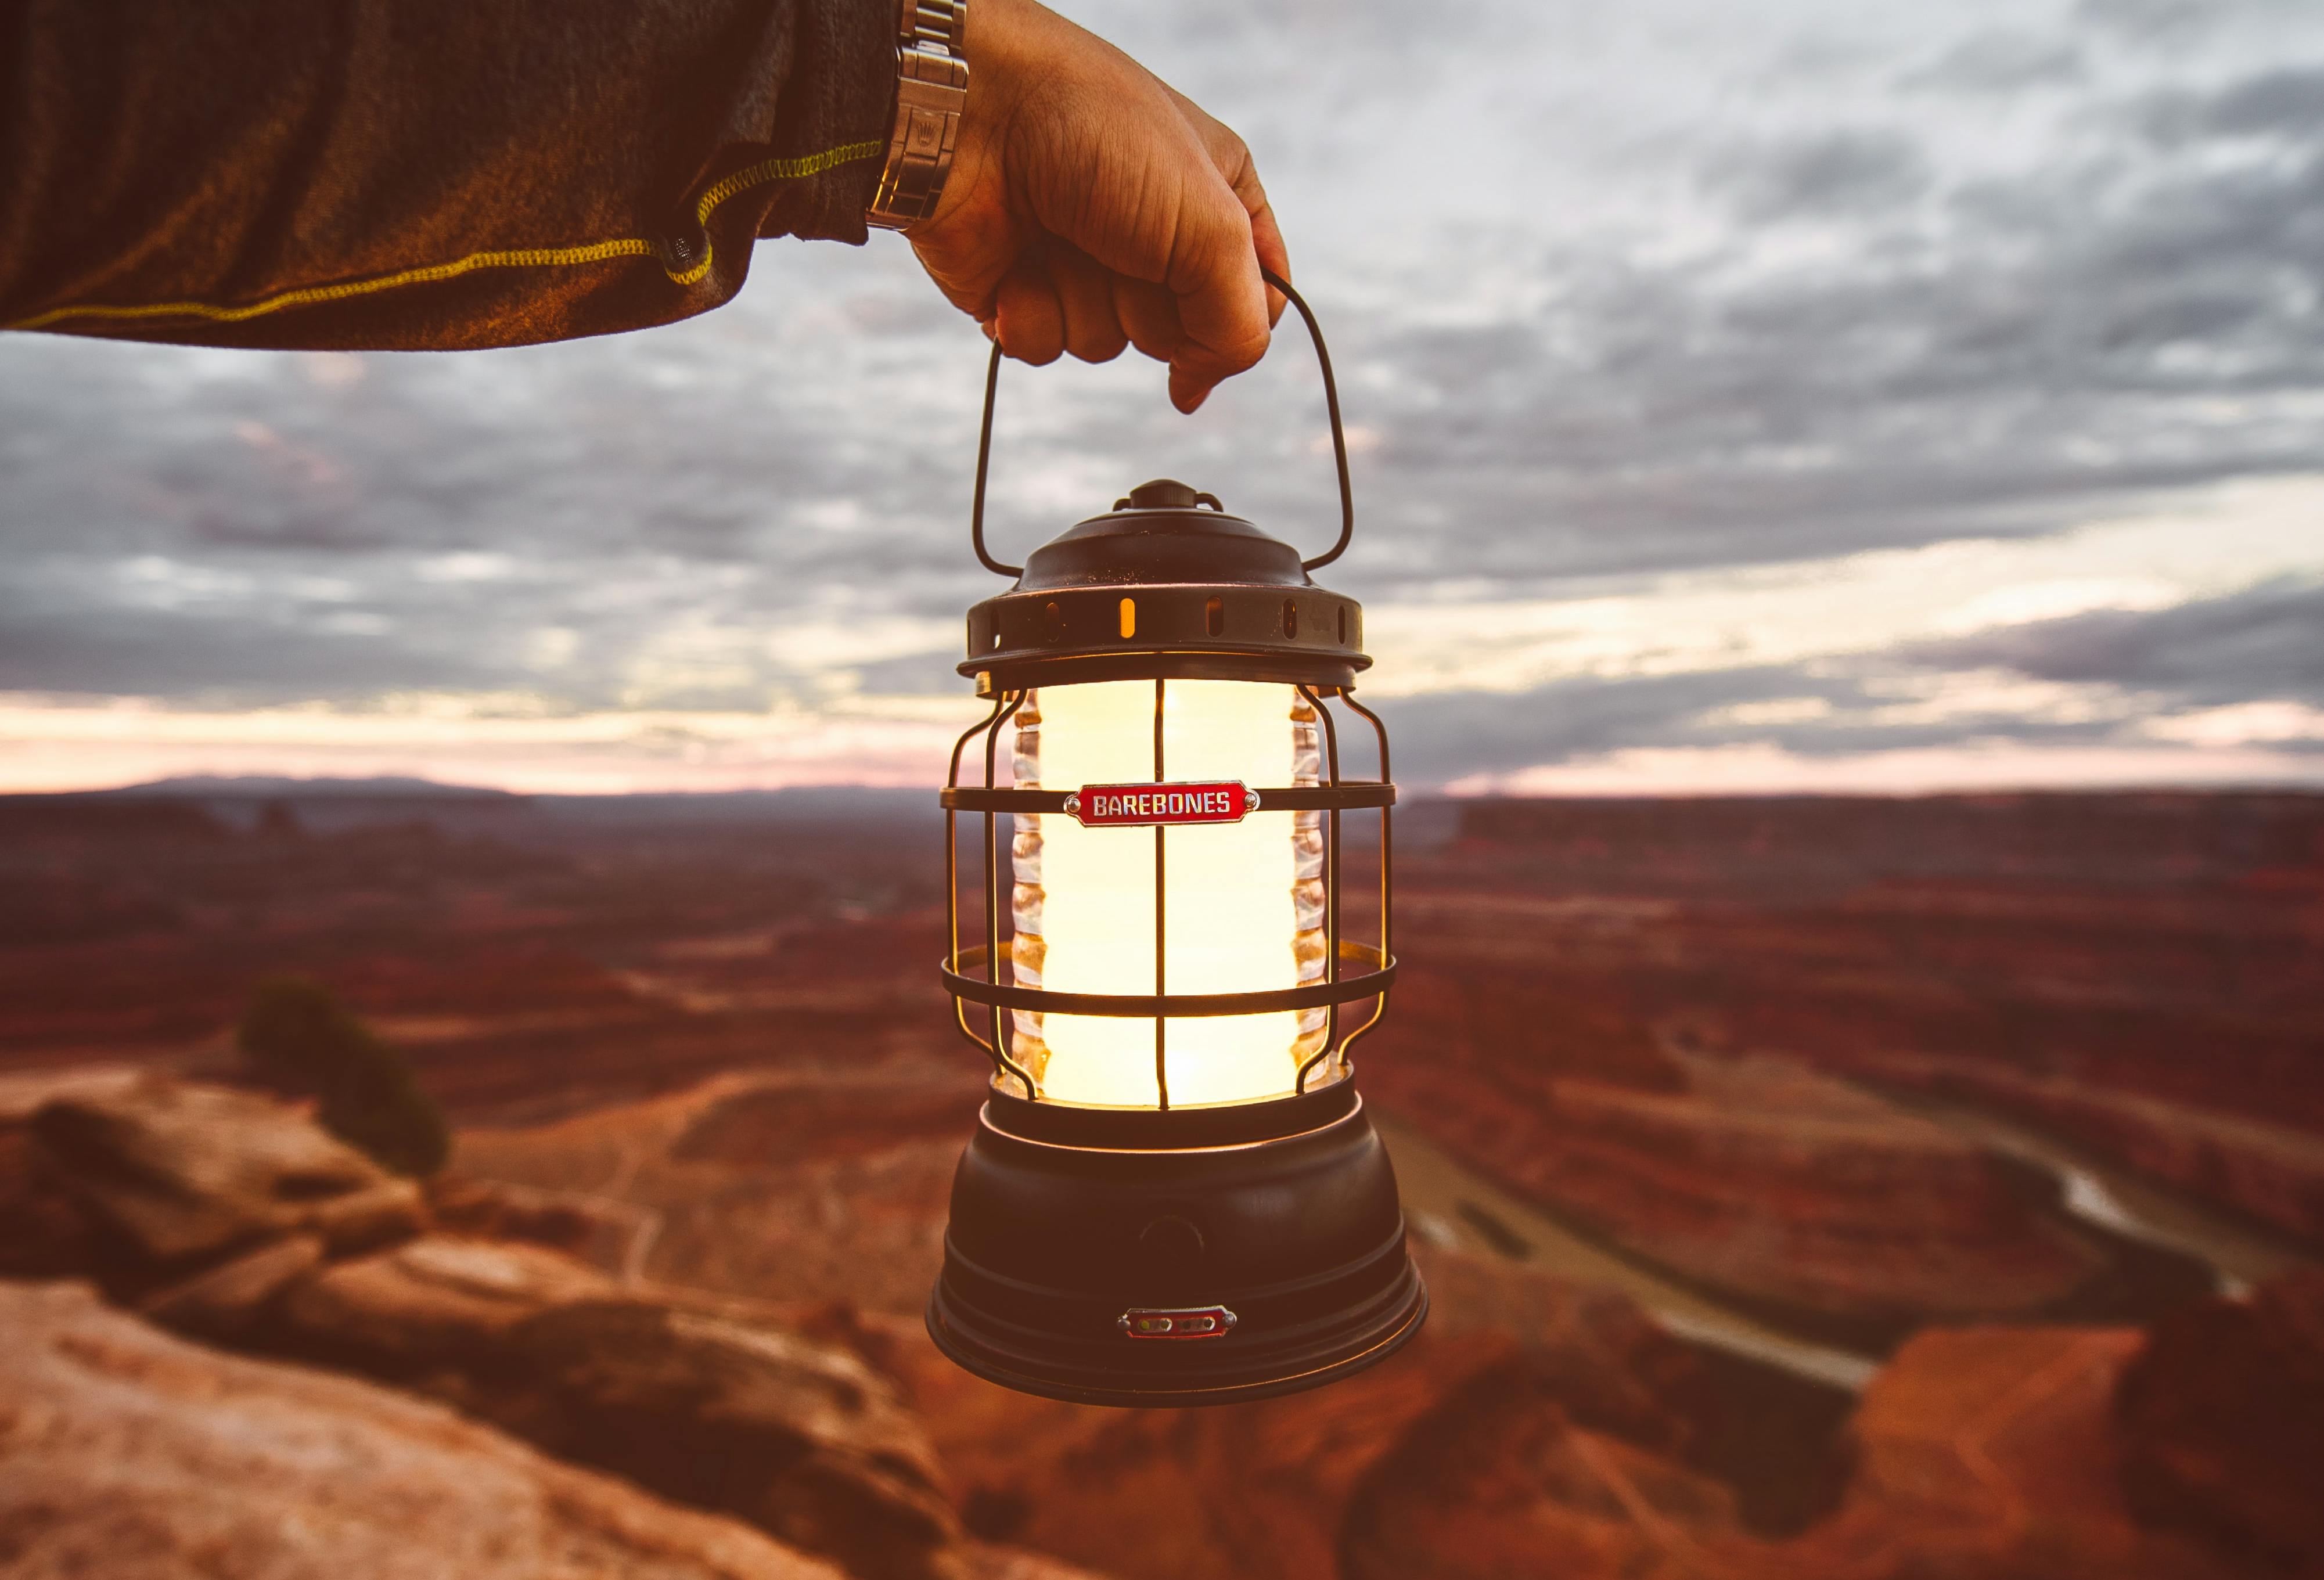 The 9 Best Camping Lights To Brighten Your Campsite - The Manual